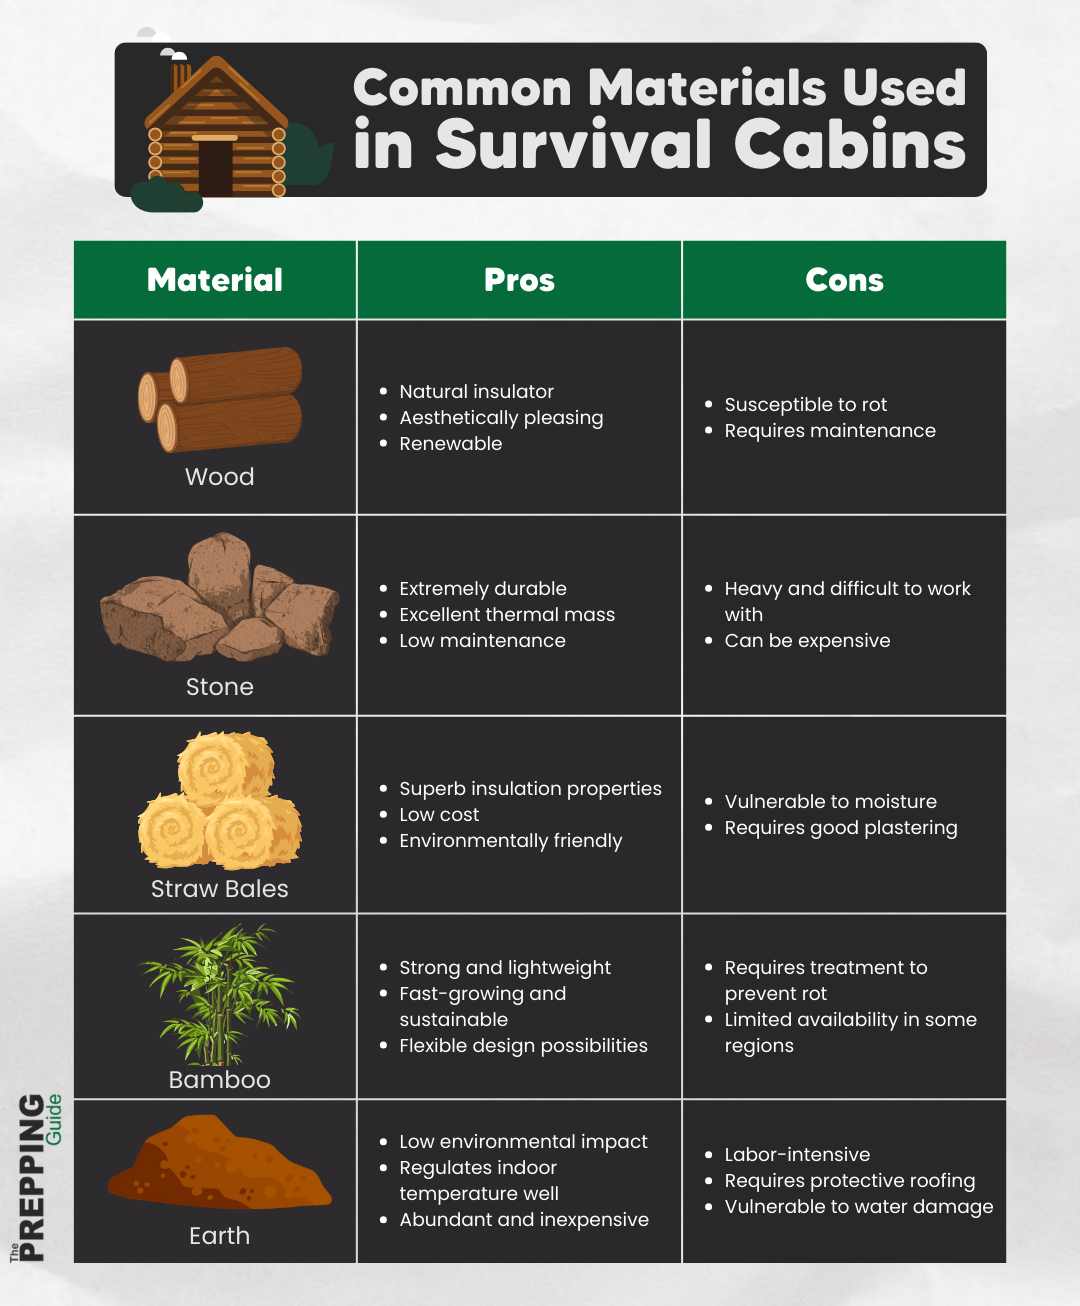 Common materials used in survival cabins